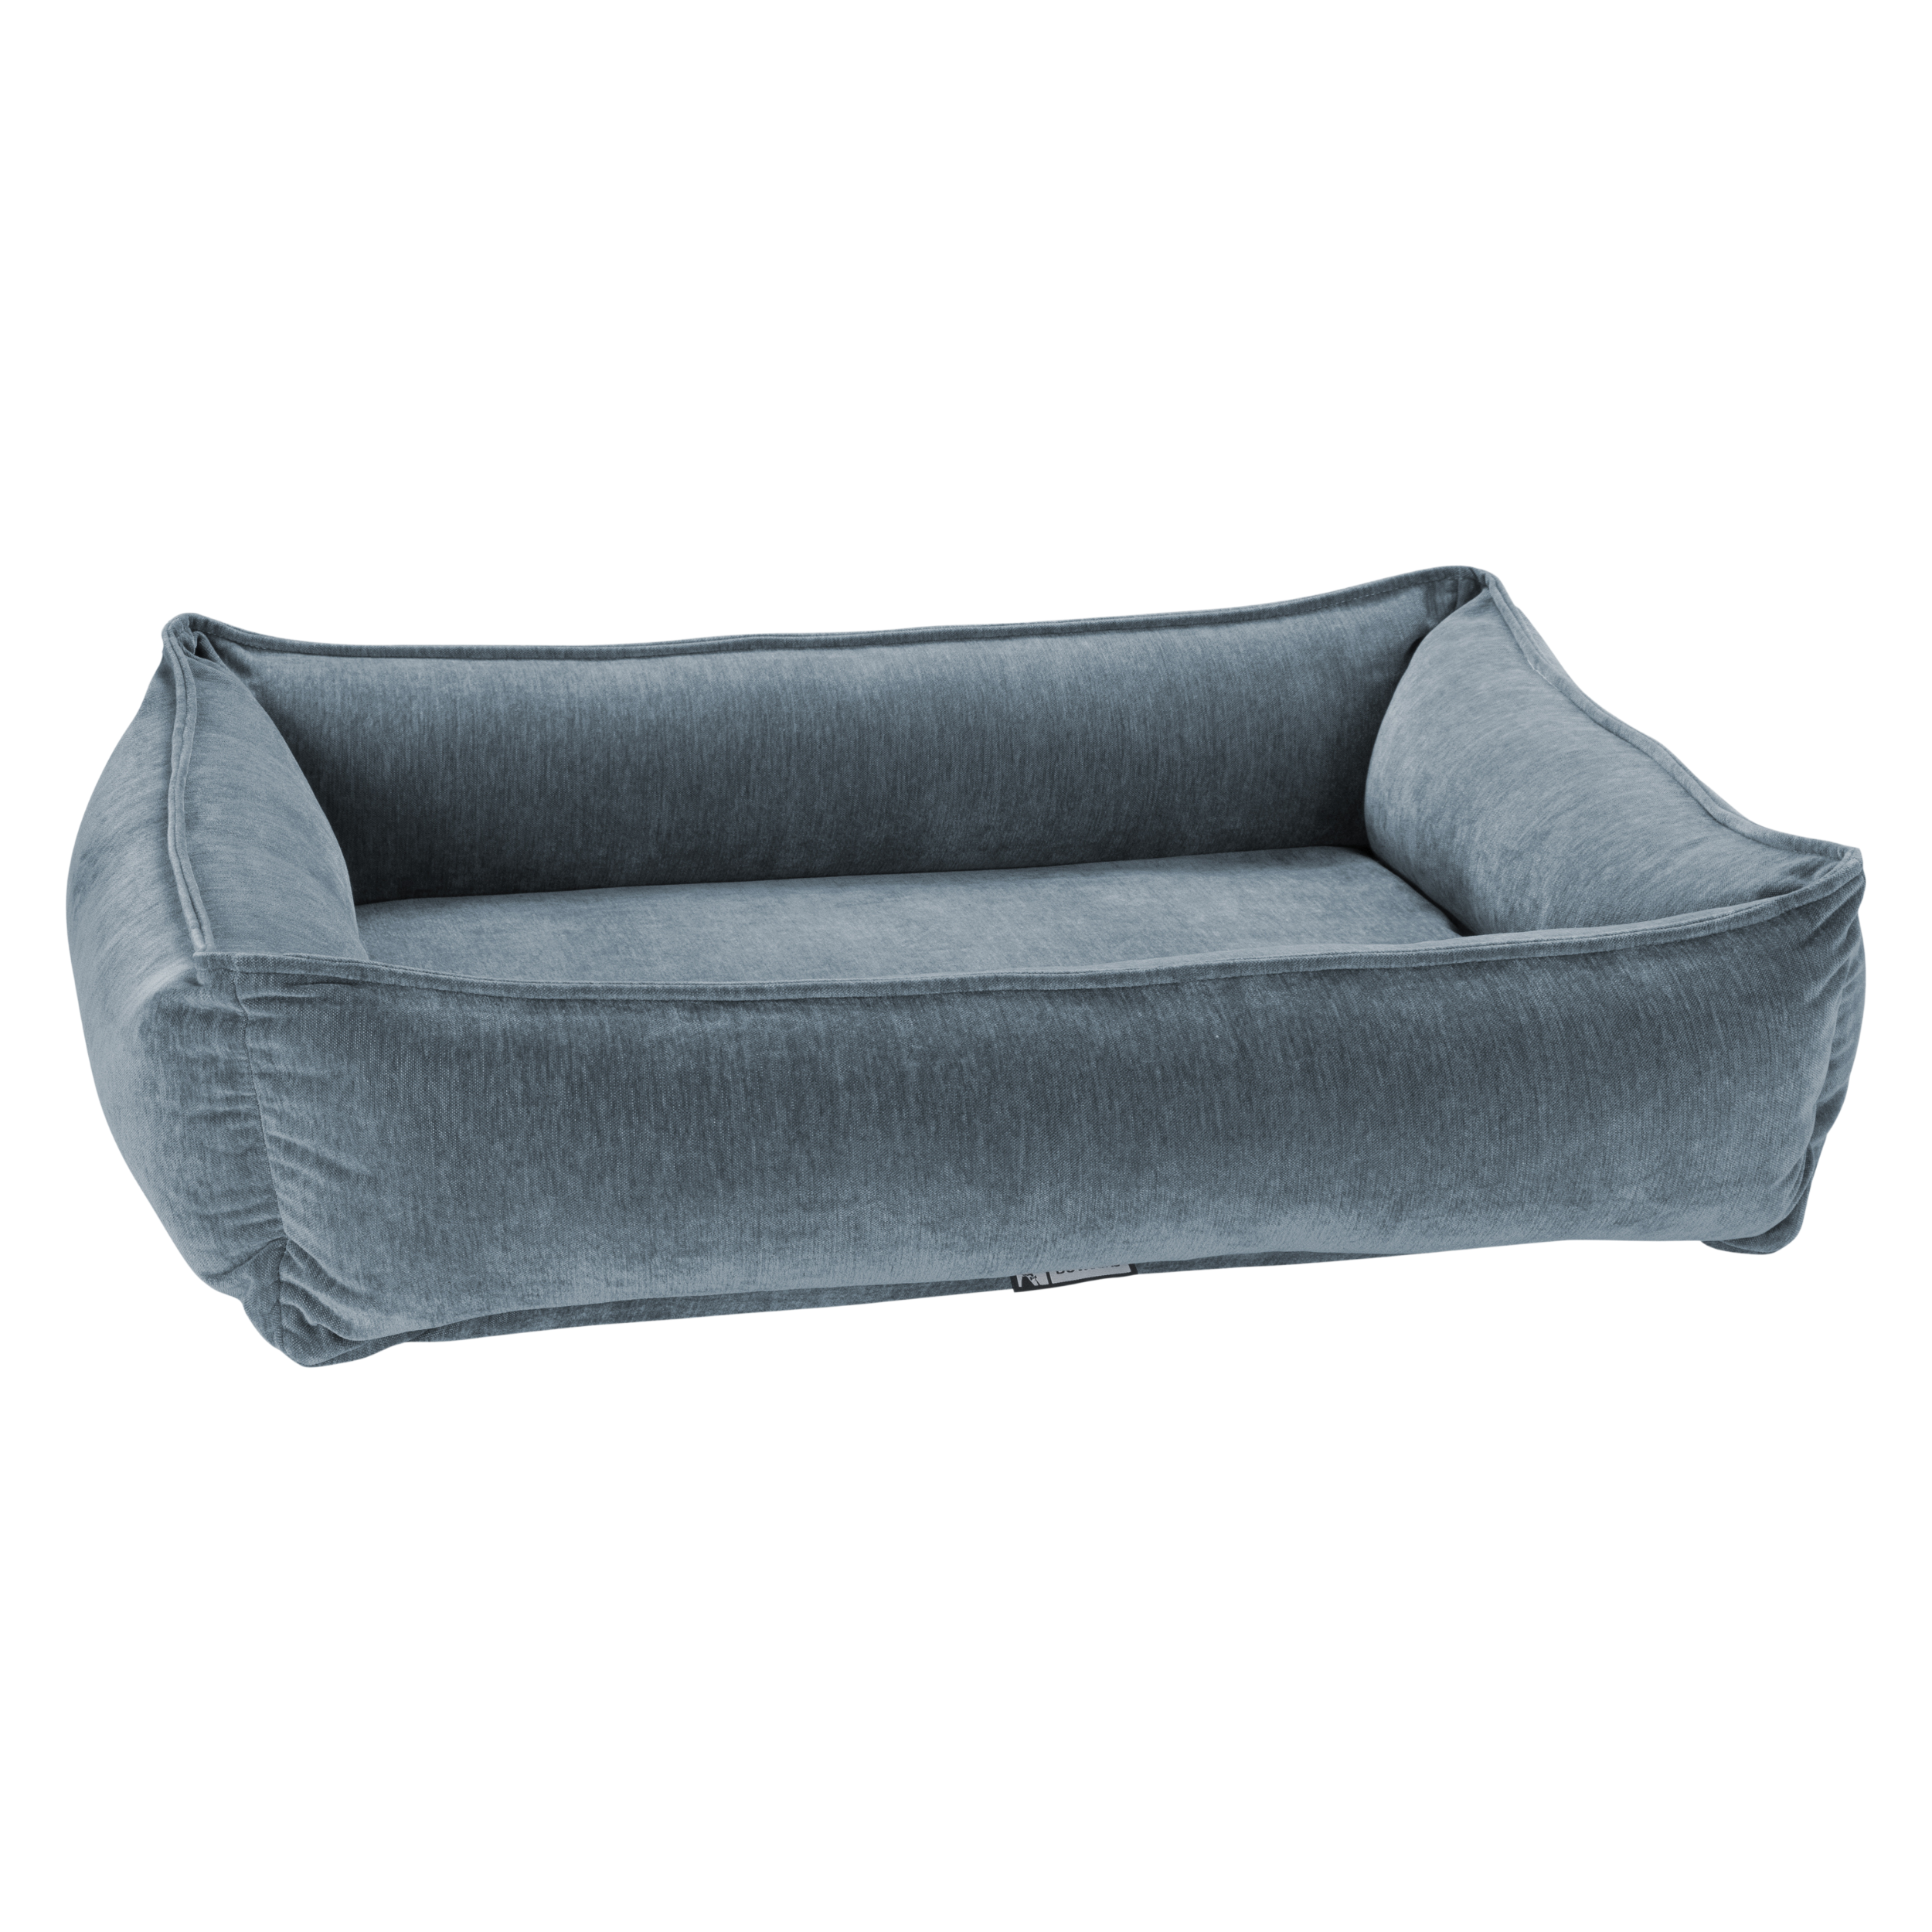 MINERAL-URBAN-LOUNGER-DOG-BED